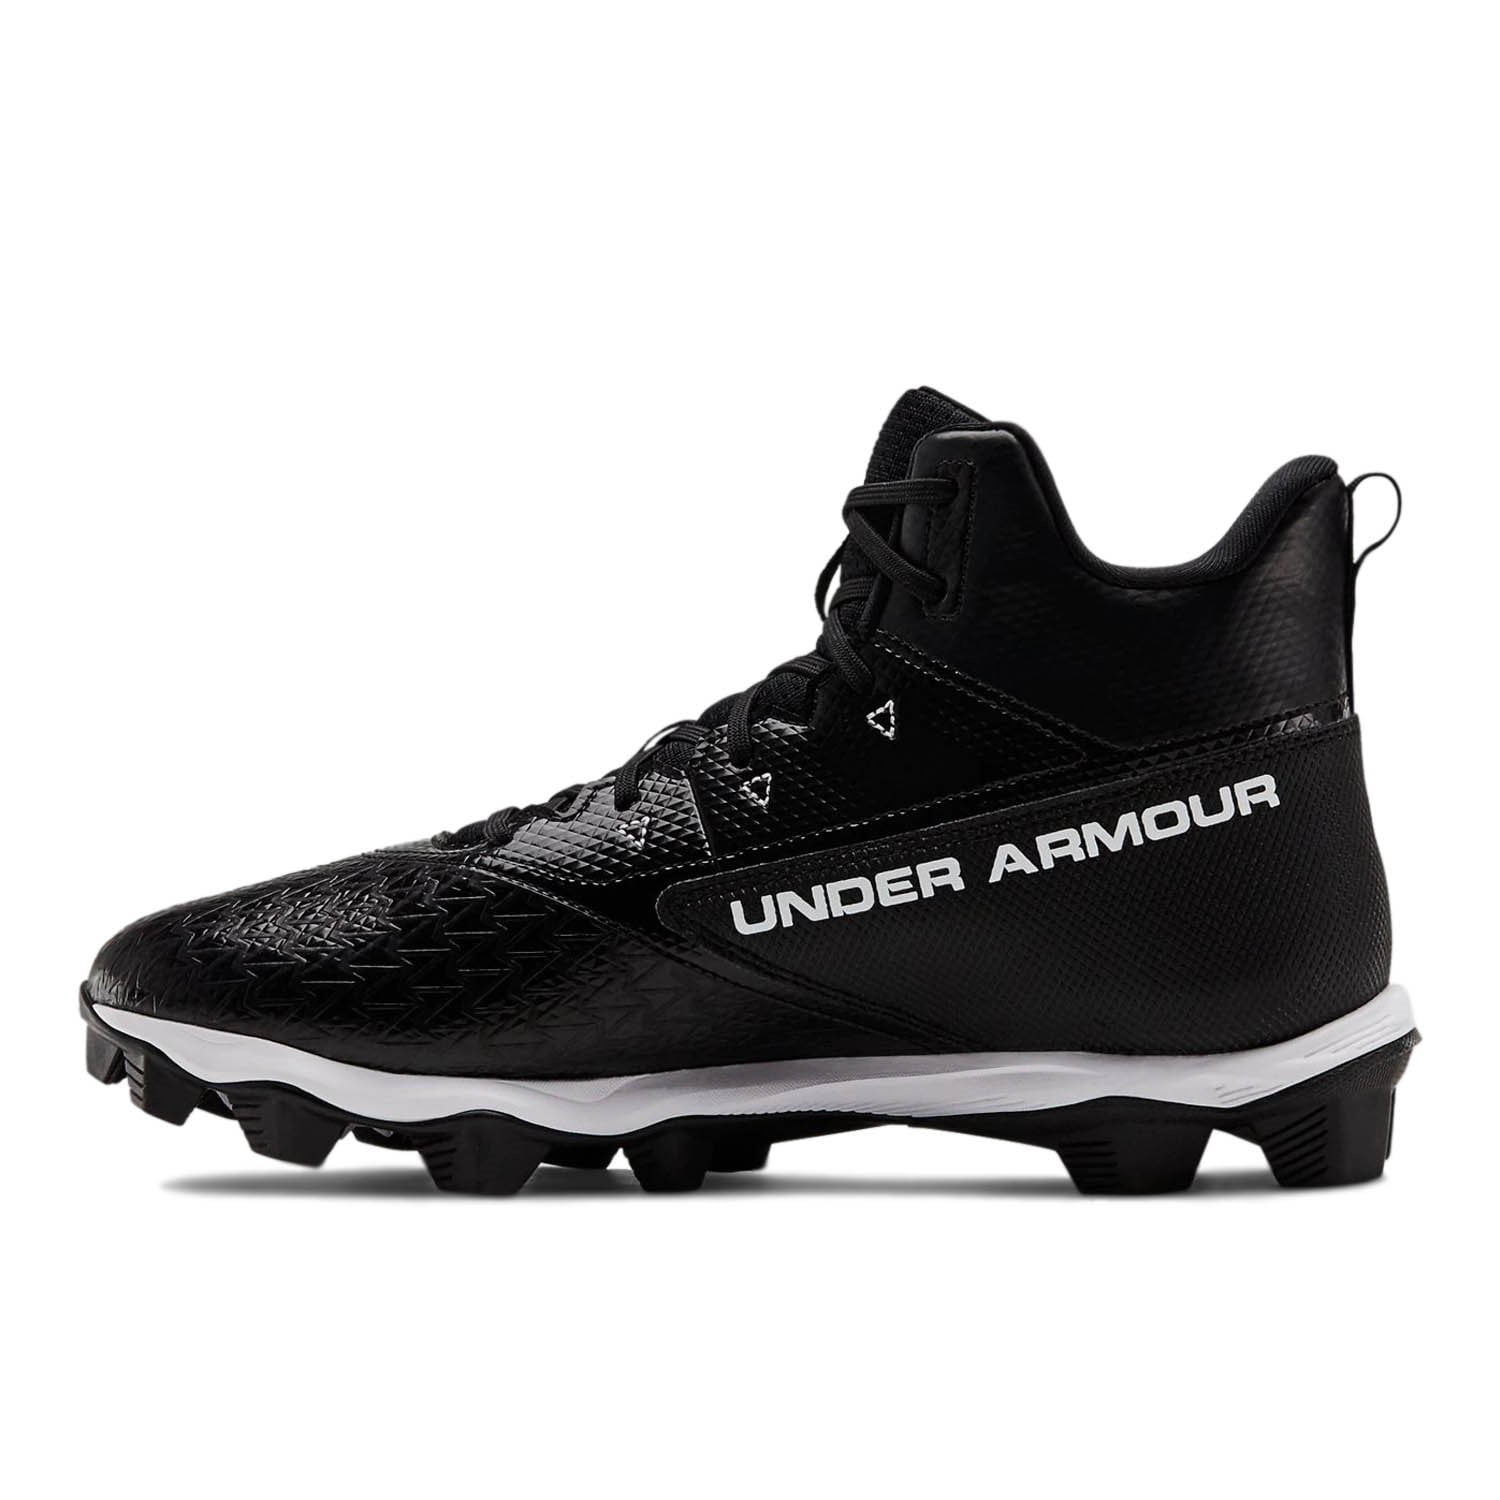 Under Armour Hammer Football Cleats Mid RM Molded Cleat 3022836 